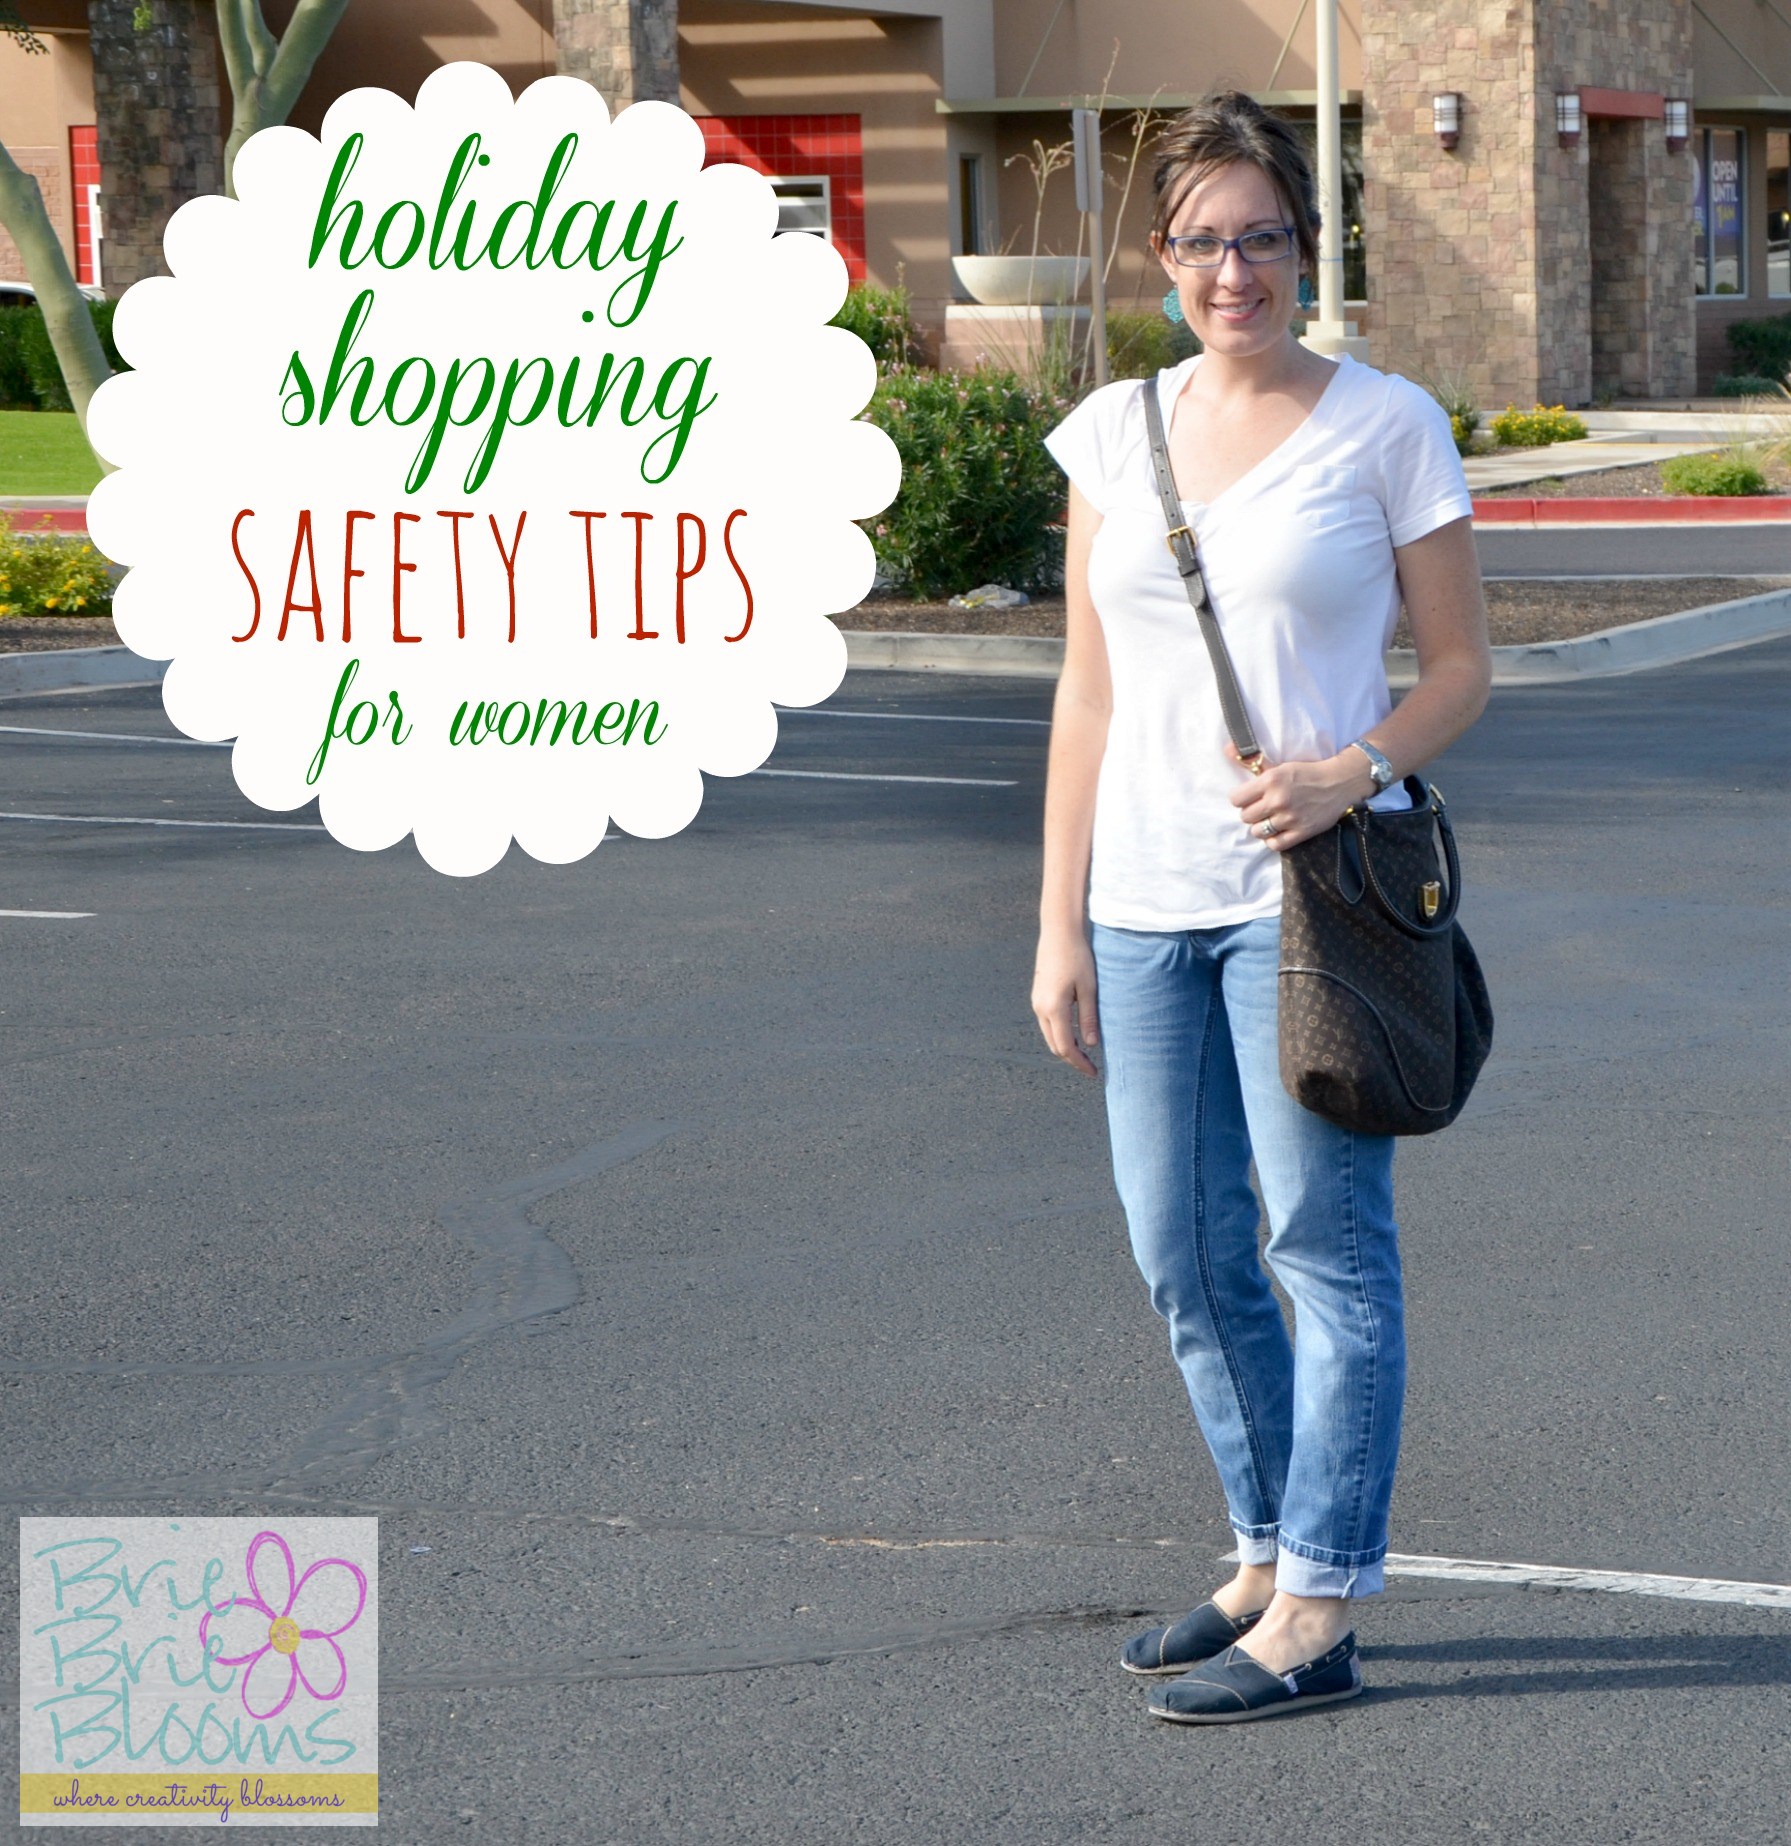 Holiday shopping safety tips for women